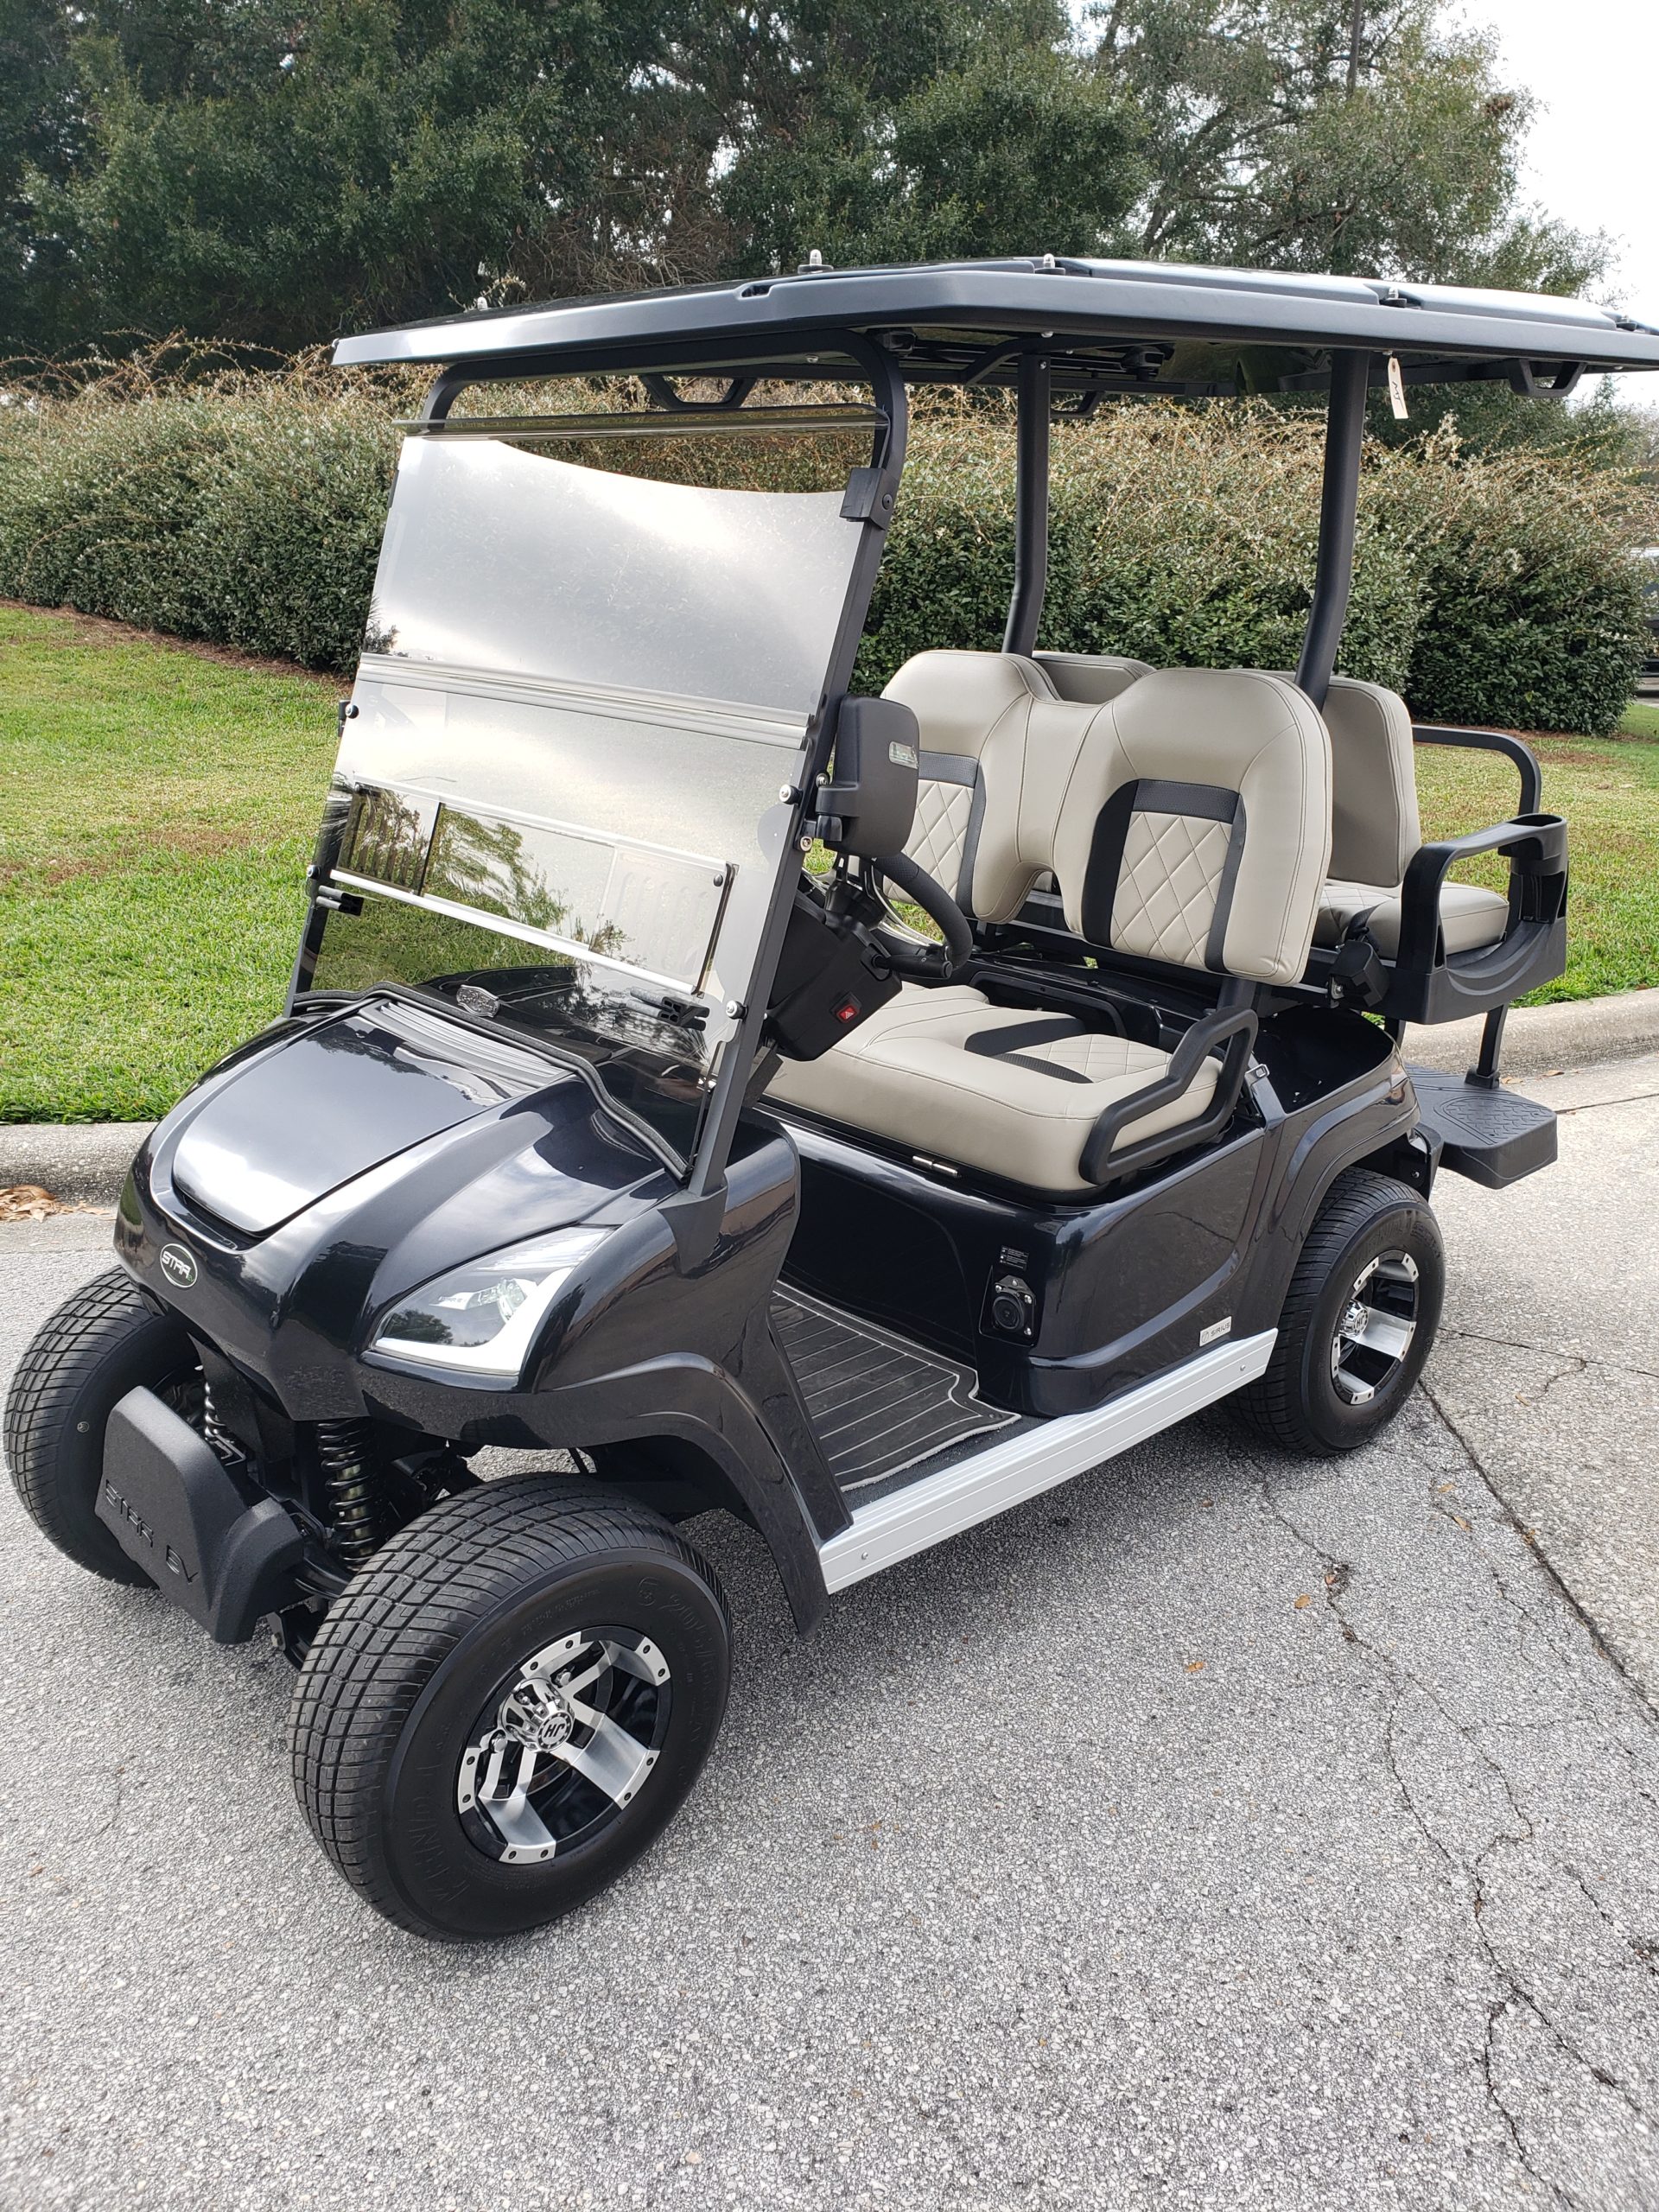 How to Explore The Villages with Spanish Springs Golf Cars